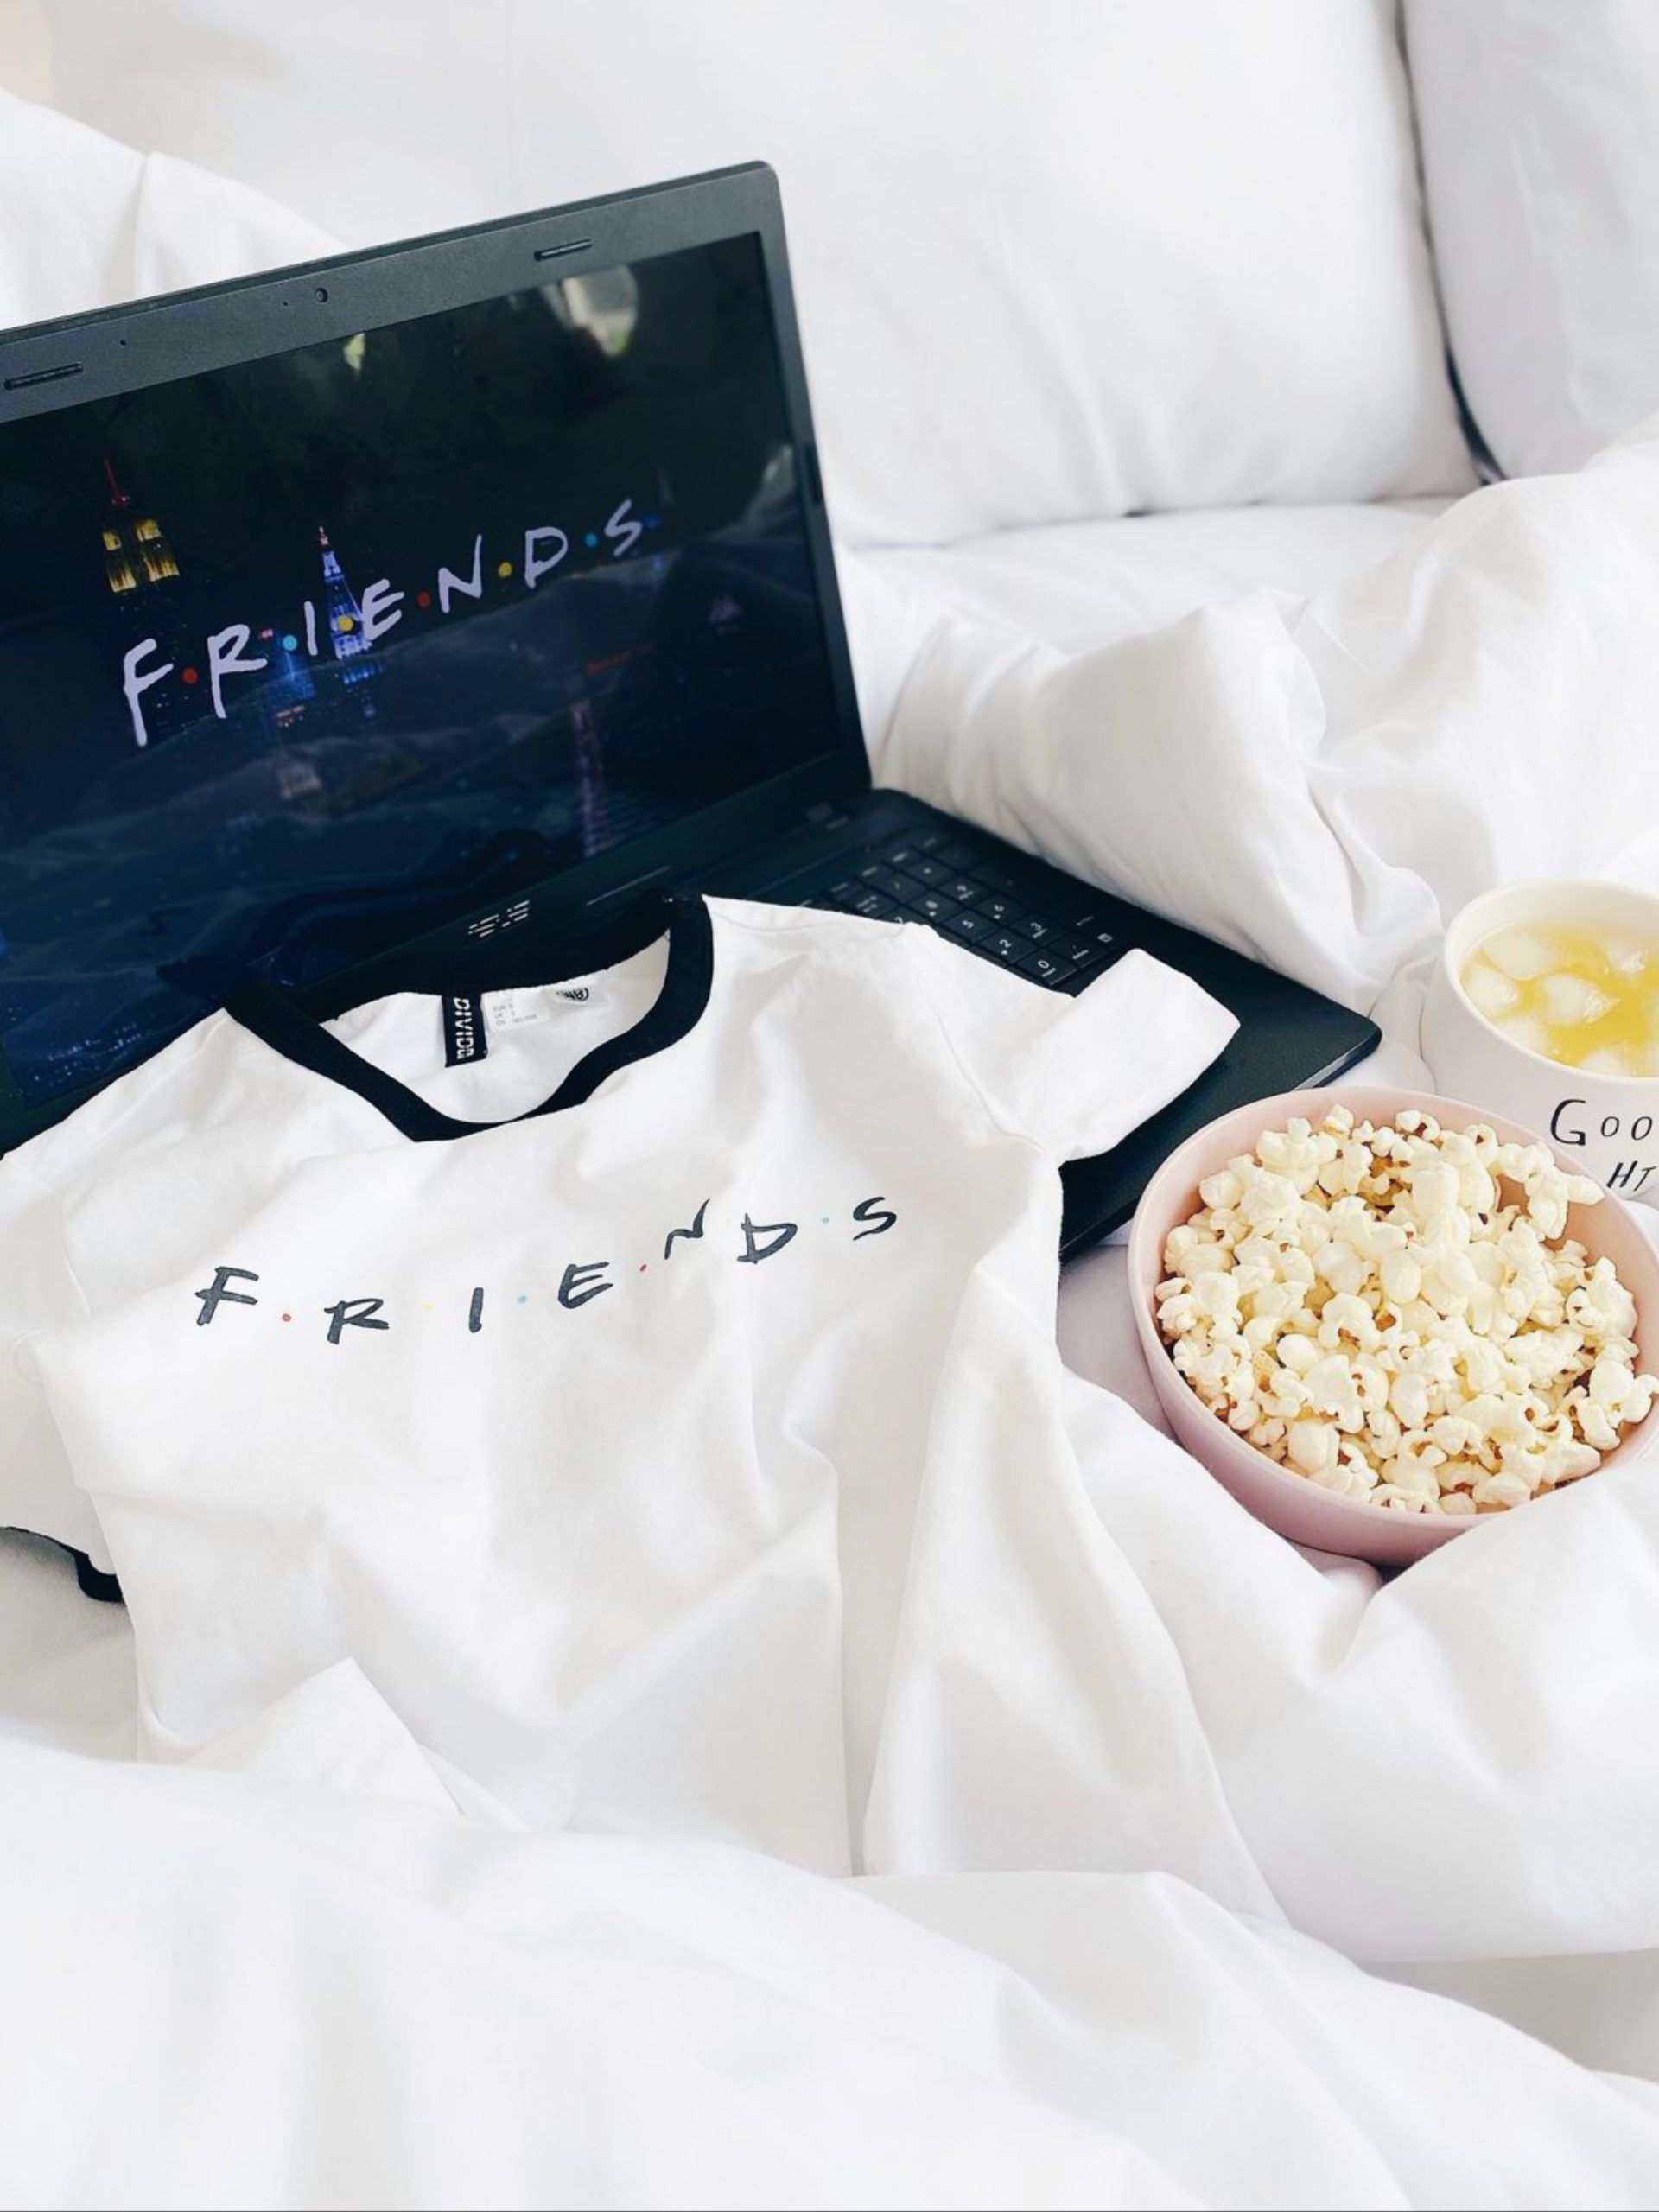 Friends tv show with bowl full of popcorn